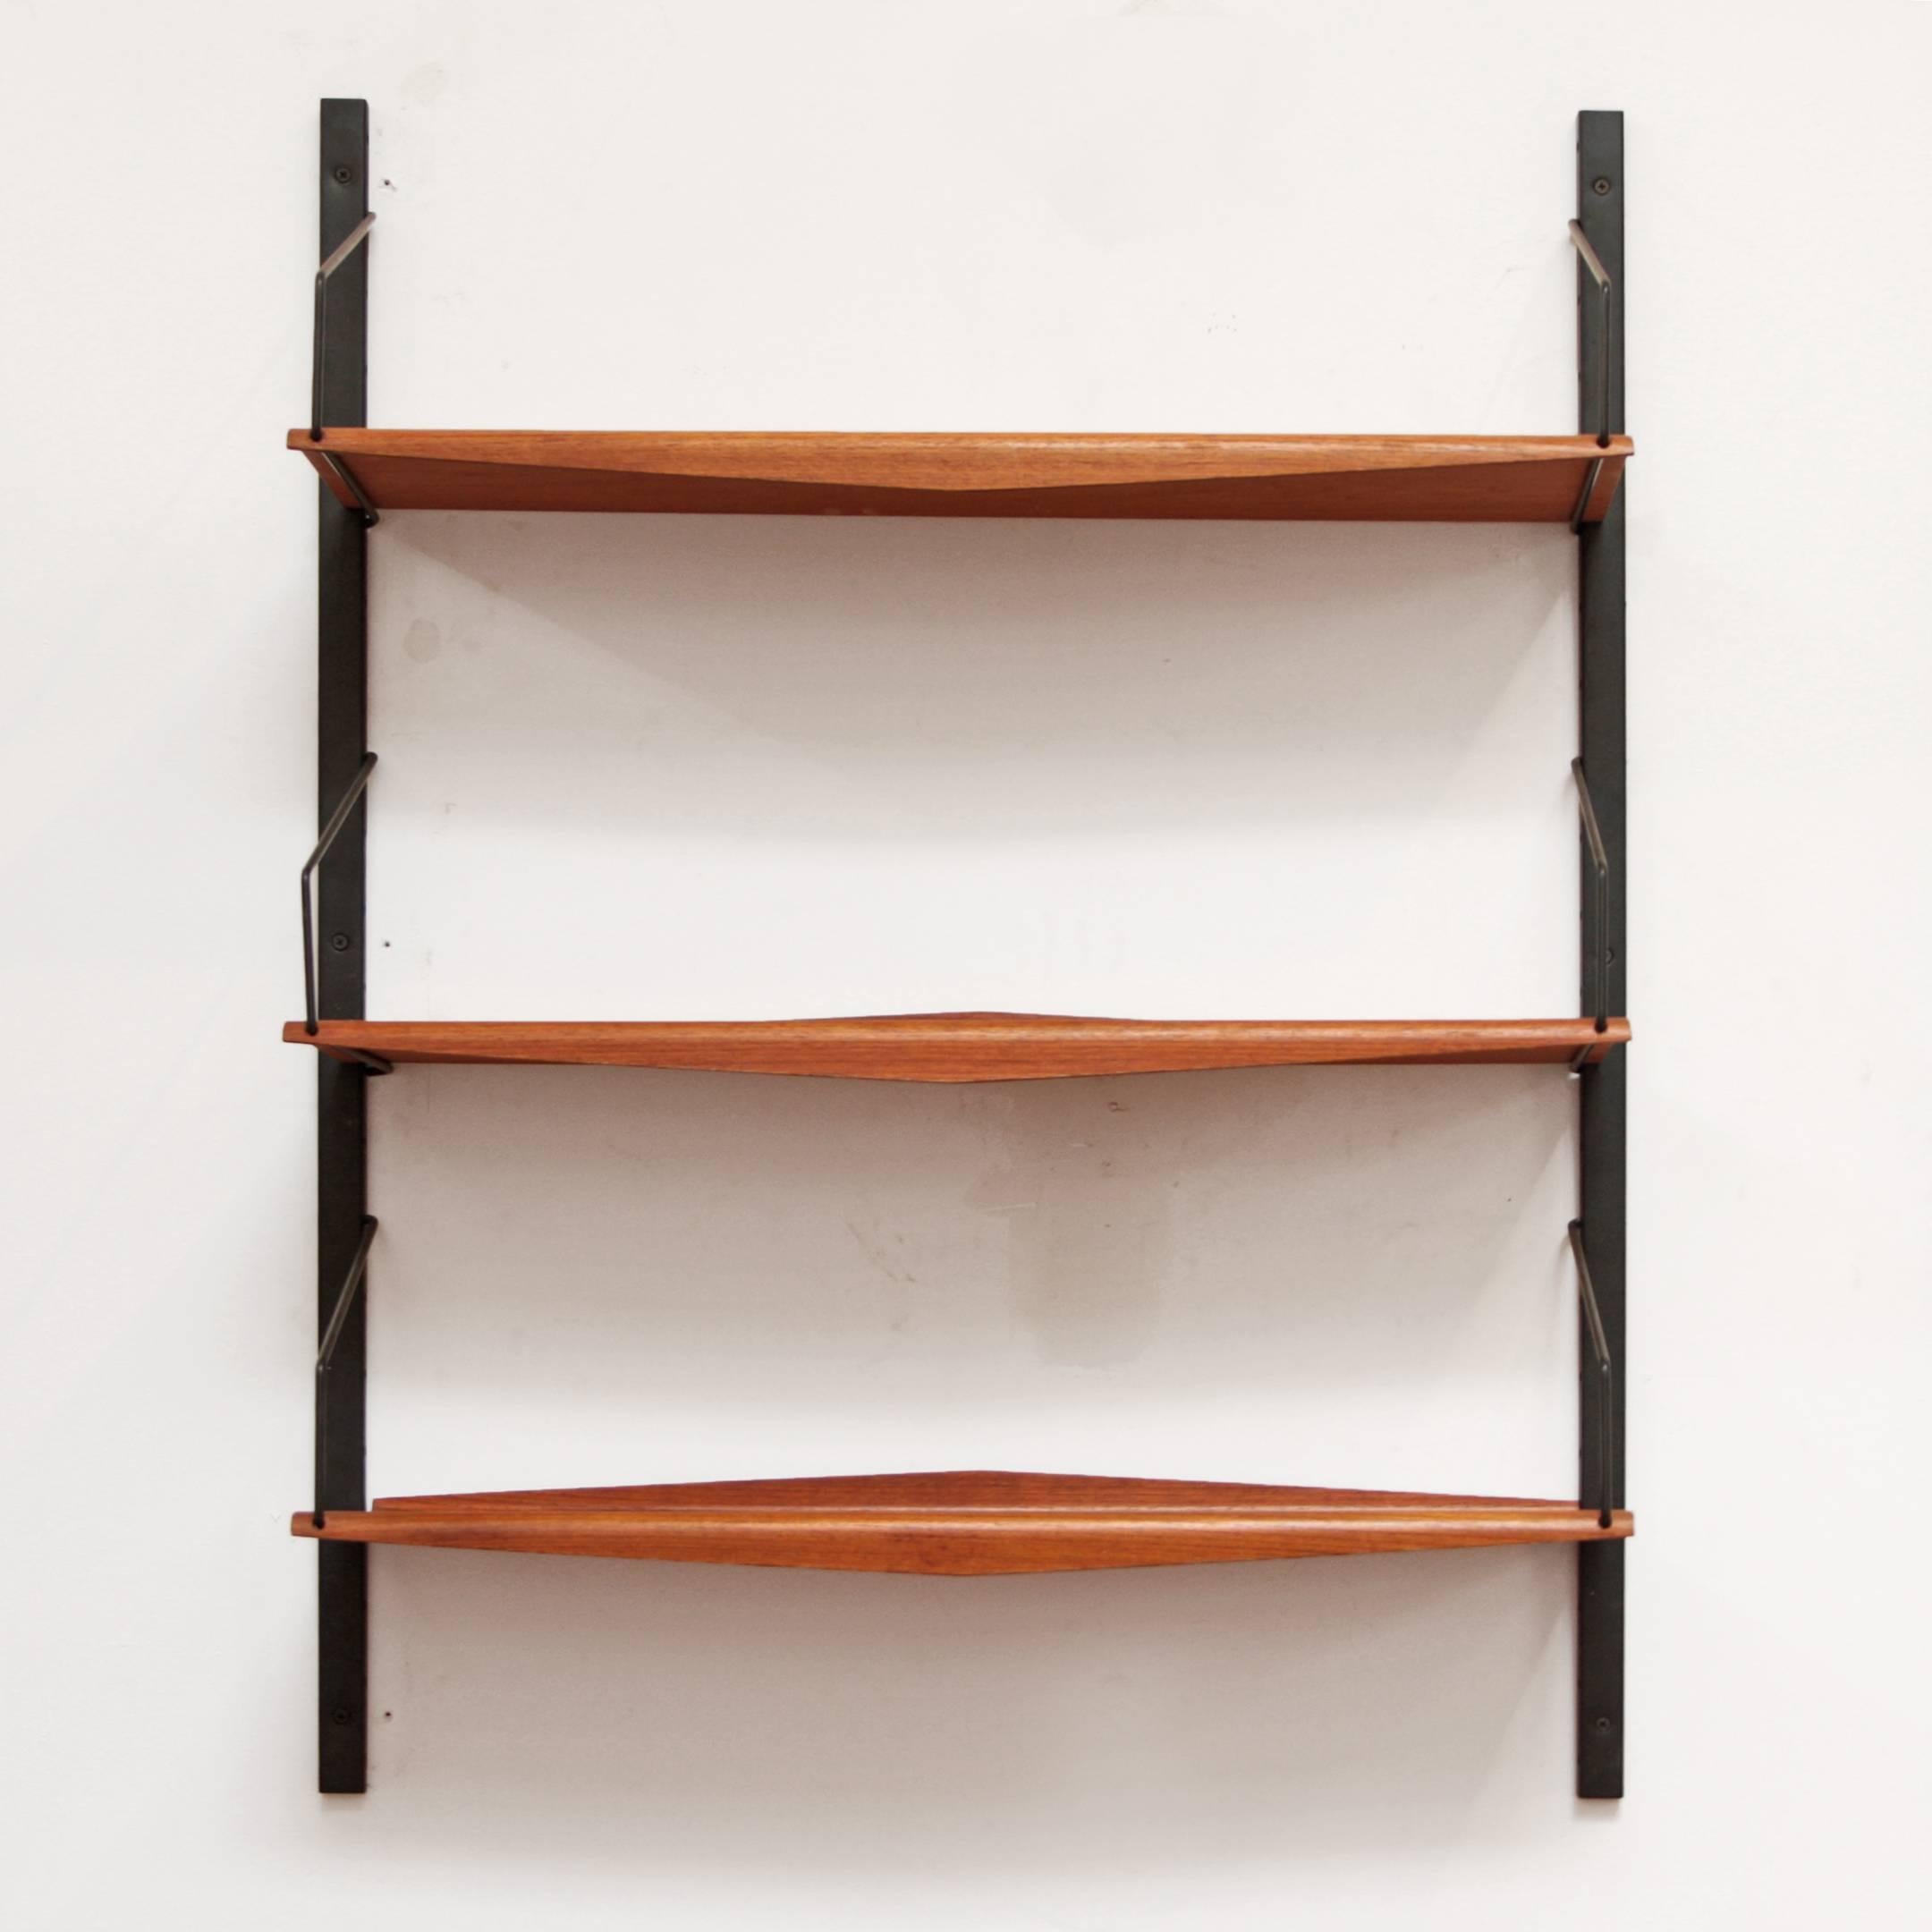 Danish Modern wall unit or bookshelf with curved teak shelves and metal hardware. Shelves are adjustable in height along the slots in rails.